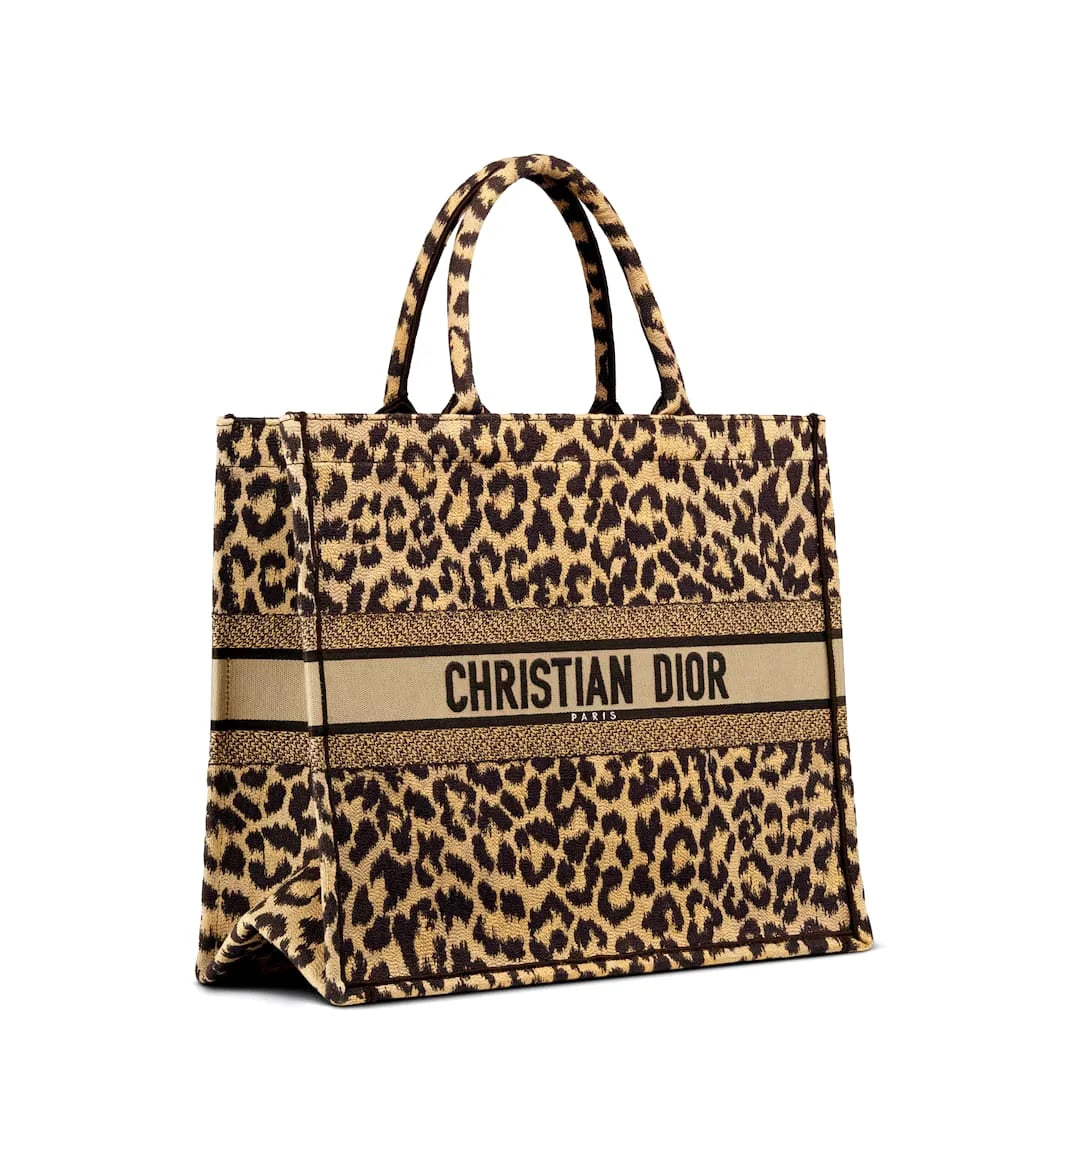 COMBO DEAL - DIOR SLIDES WITH DIOR BOOK TOTE BAG - LEOPARD